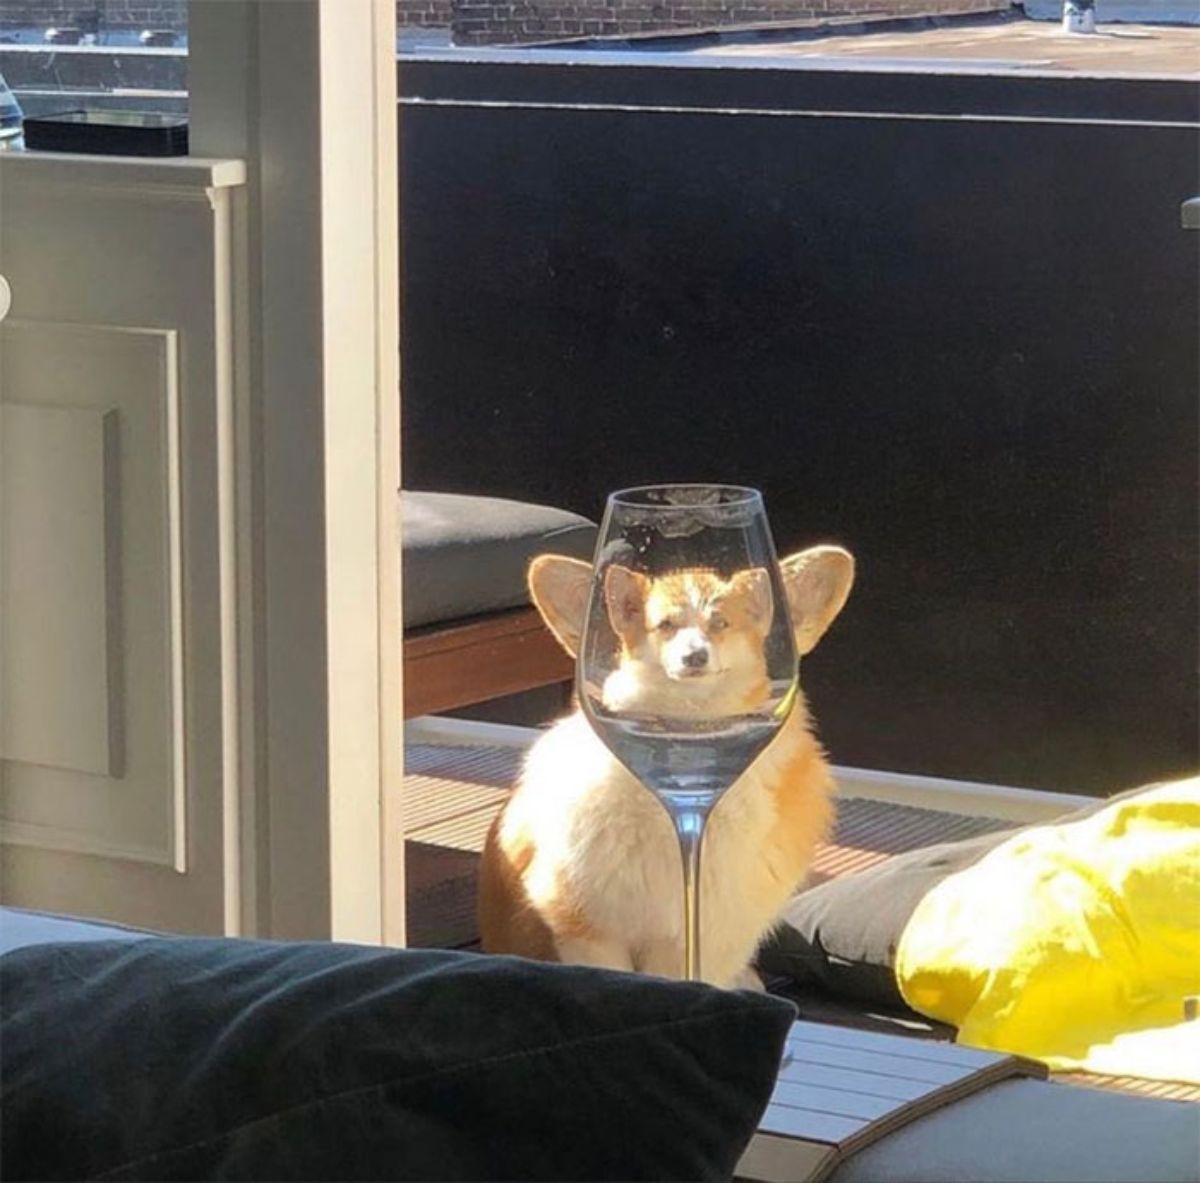 brown and white corgi sitting on the ground seen through a wine glass